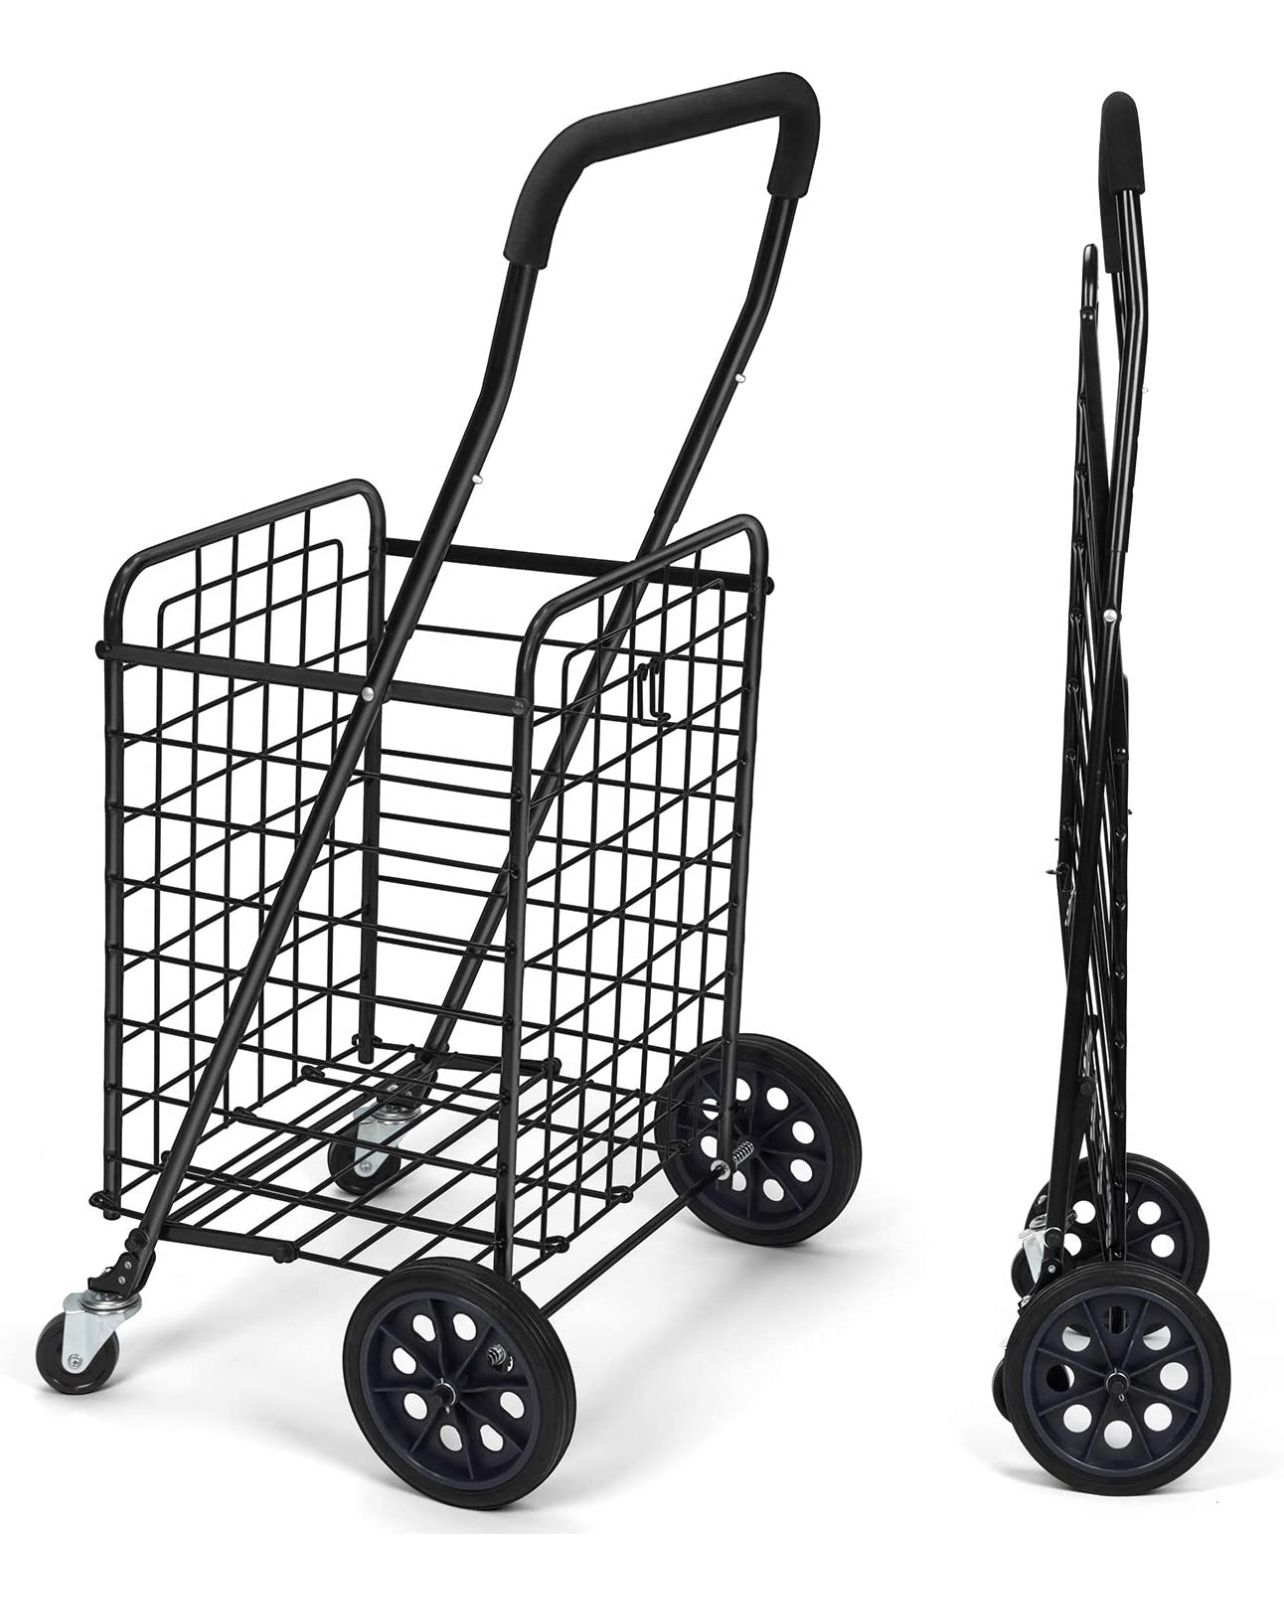 Pipishell Shopping Cart with Dual Swivel Wheels for Groceries - Compact Folding Portable Cart Saves Space - with Adjustable Handle Height - Lightweigh